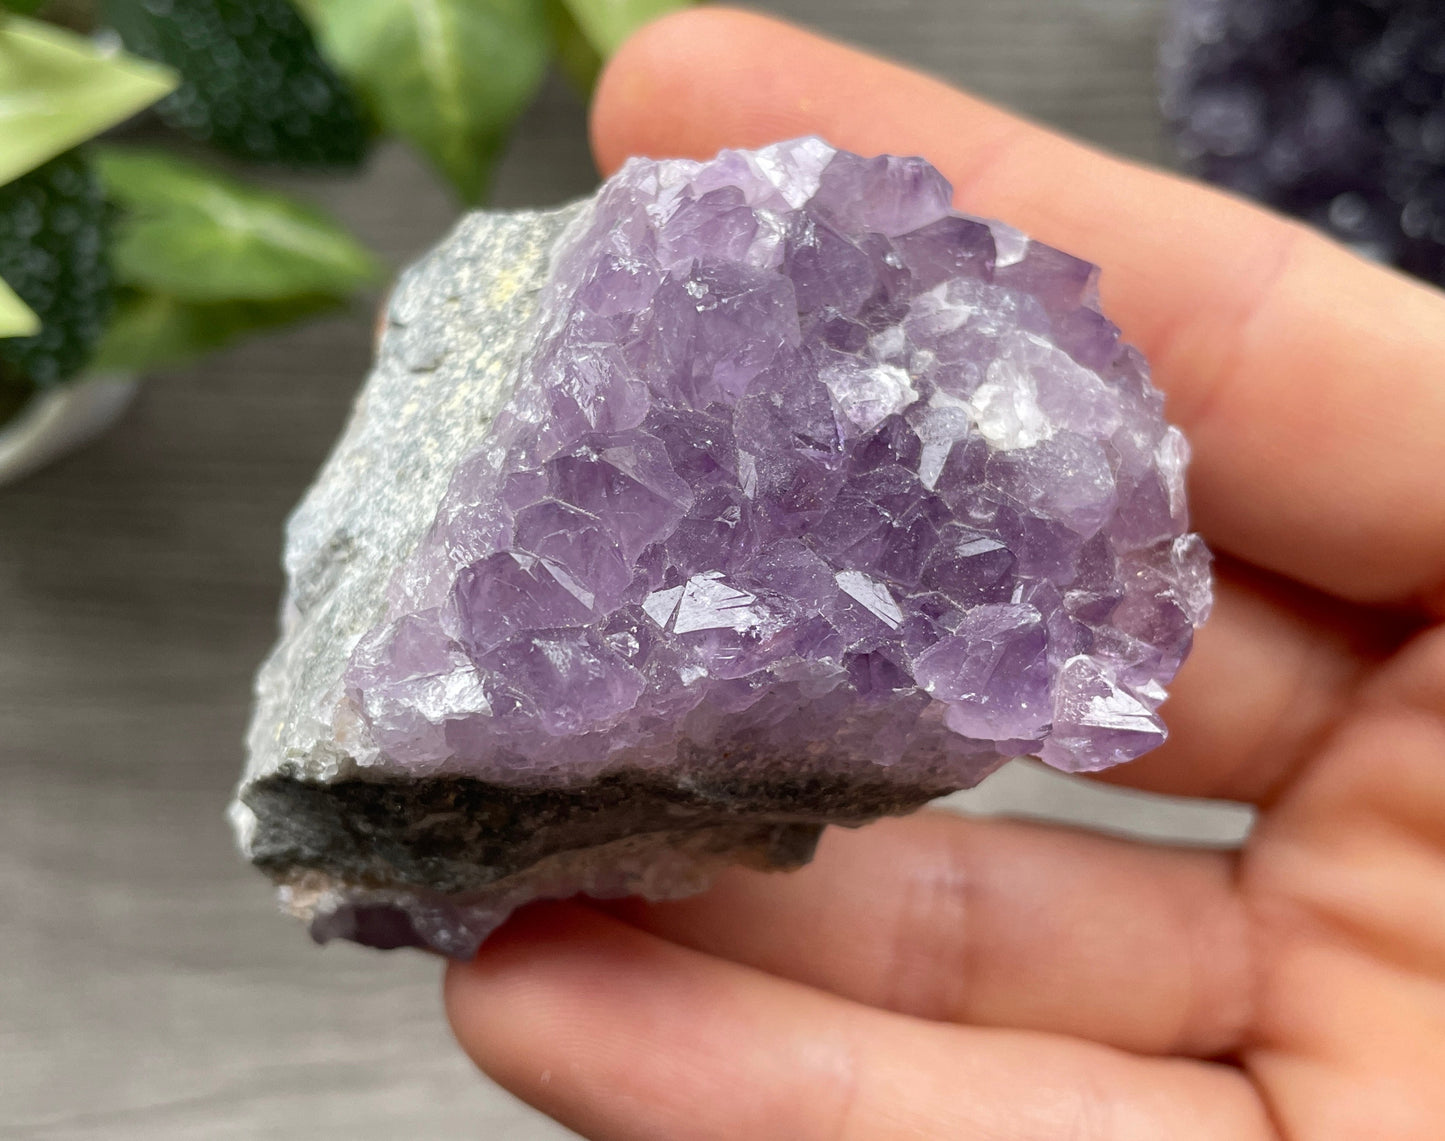 Pictured is a Thunder Bay amethyst cluster.